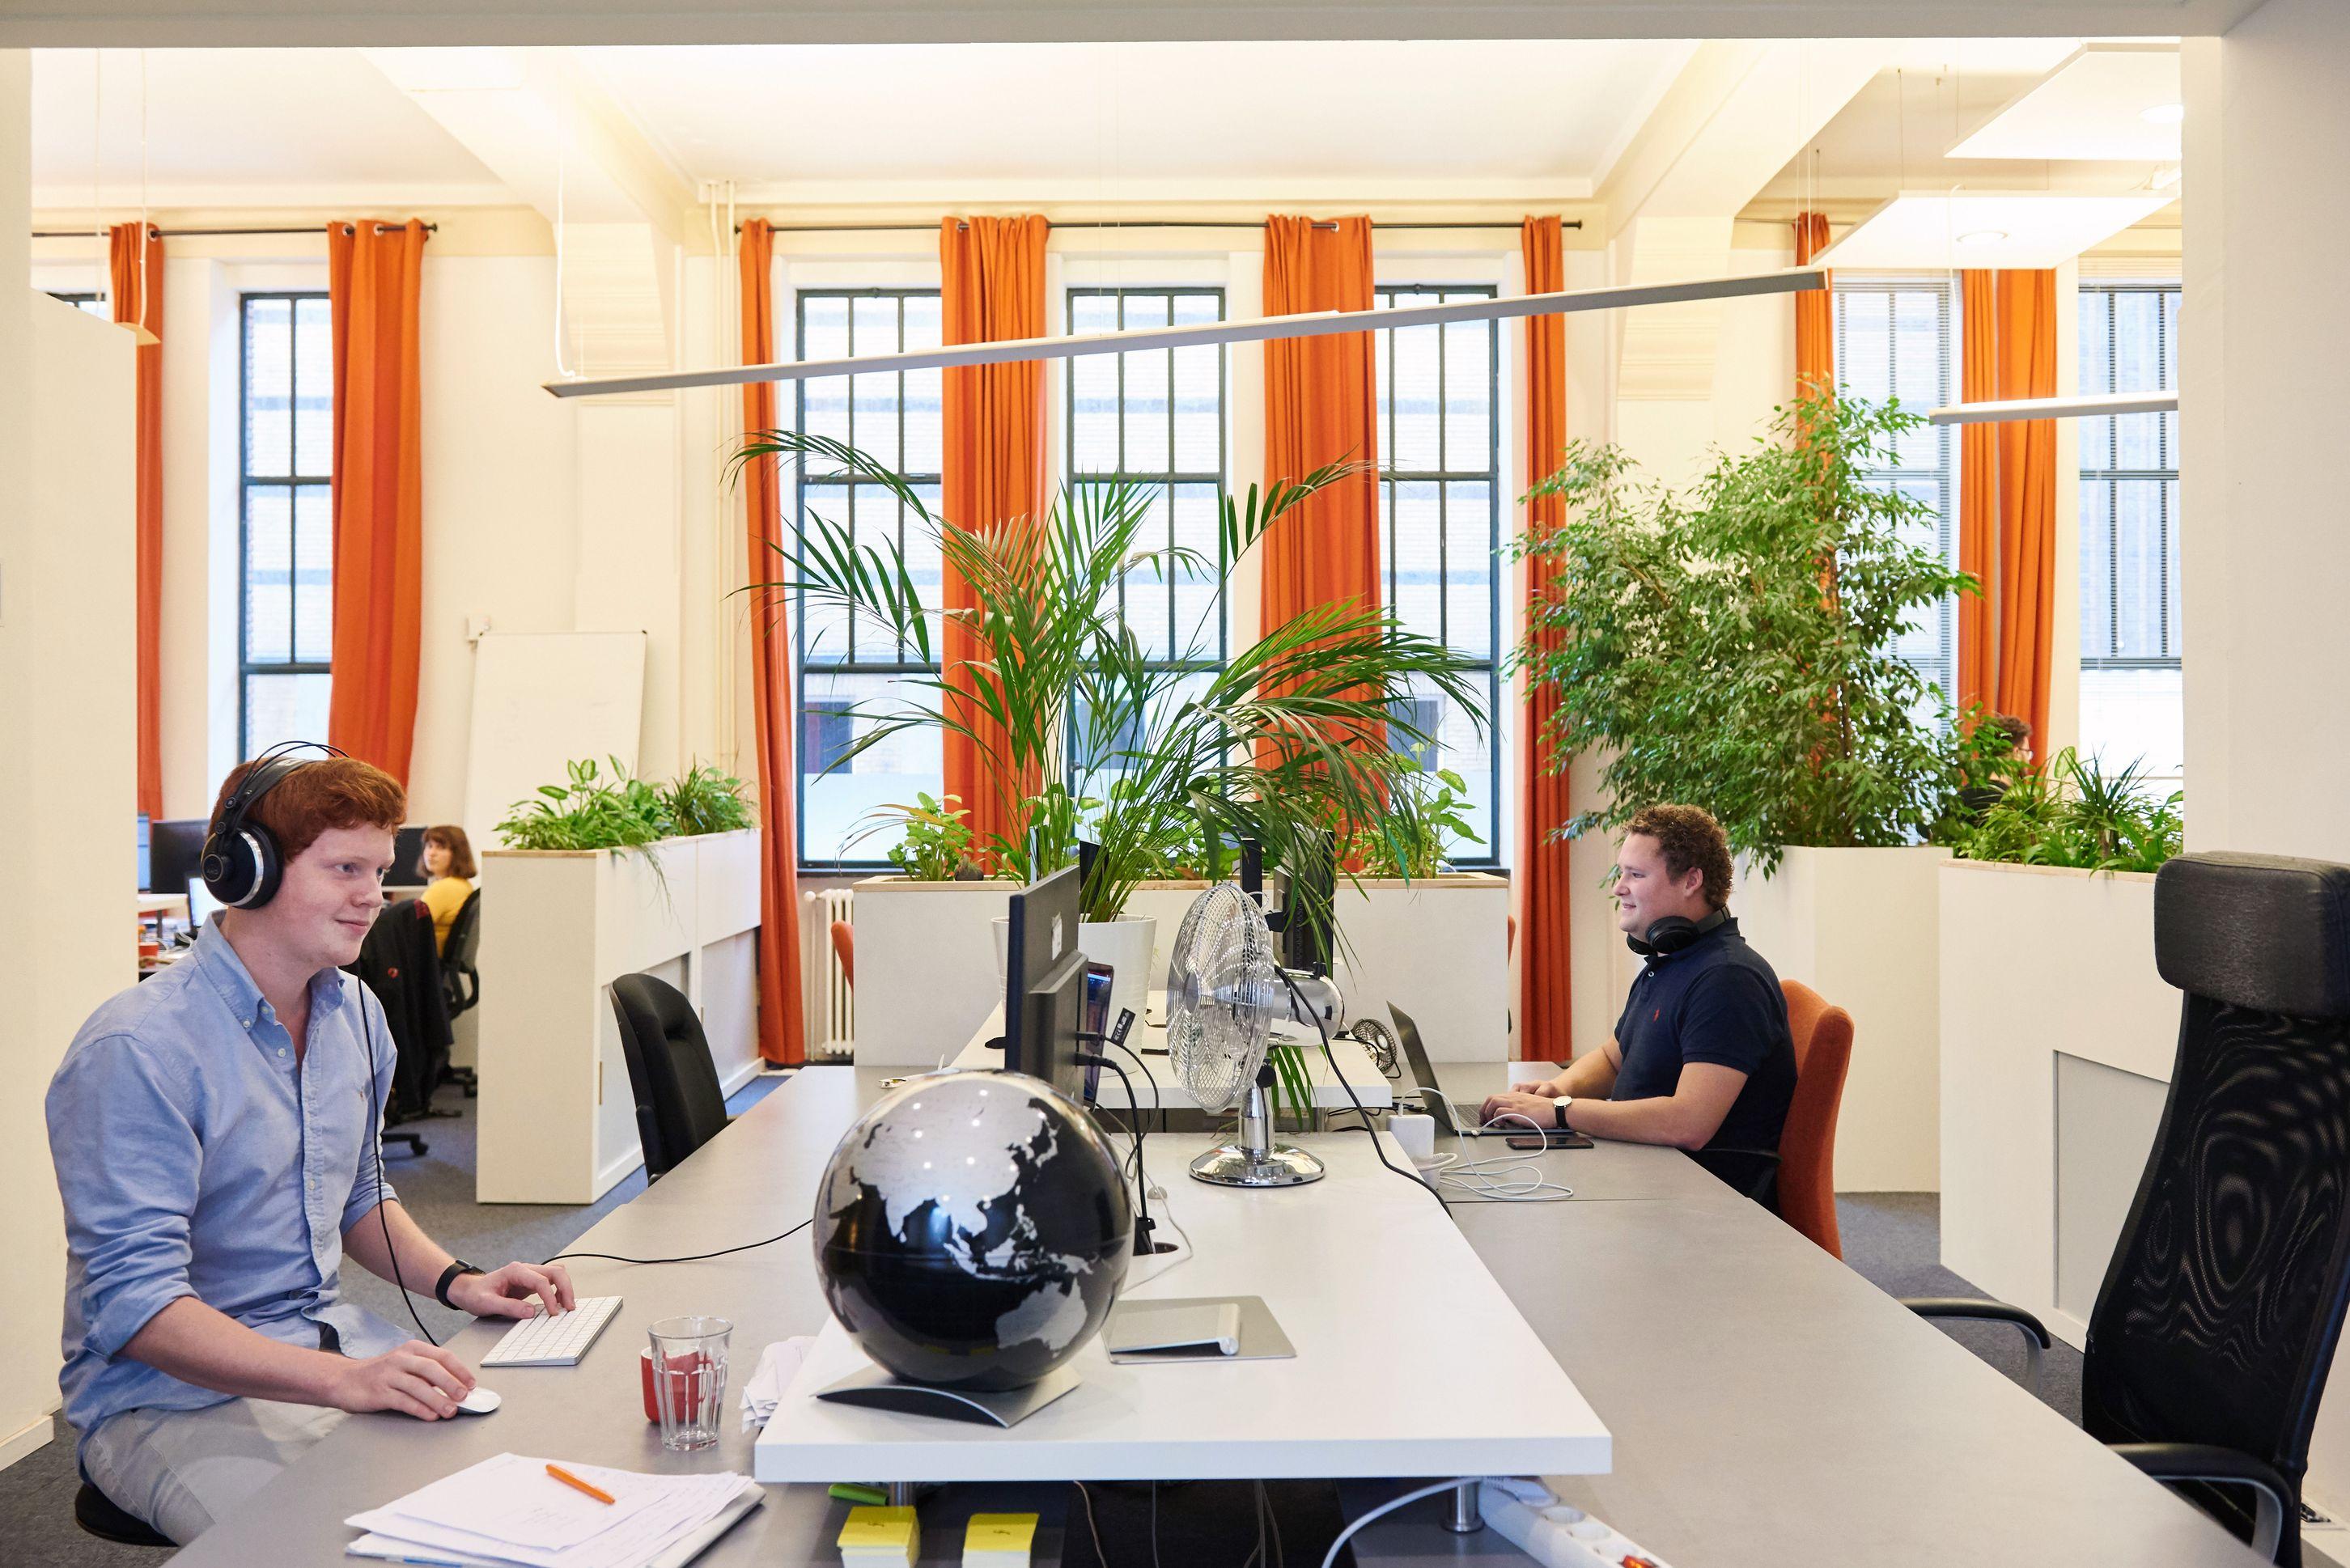 A good place is half the work: we work in a coworking space